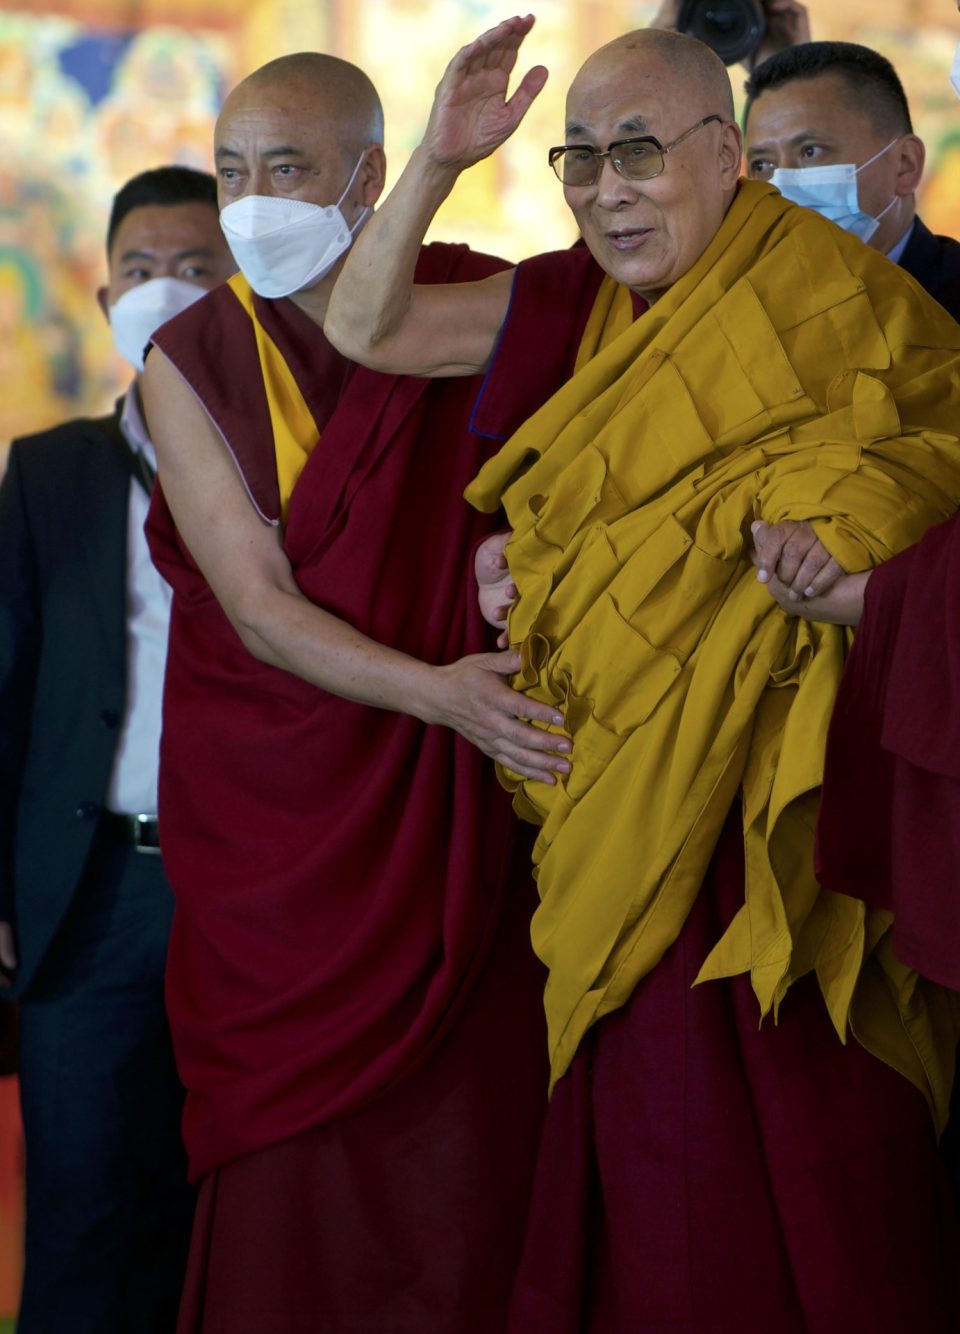 Bodhgaya Teachings with His Holiness the Dalai Lama—a Feeling of ‘Home’ for Many